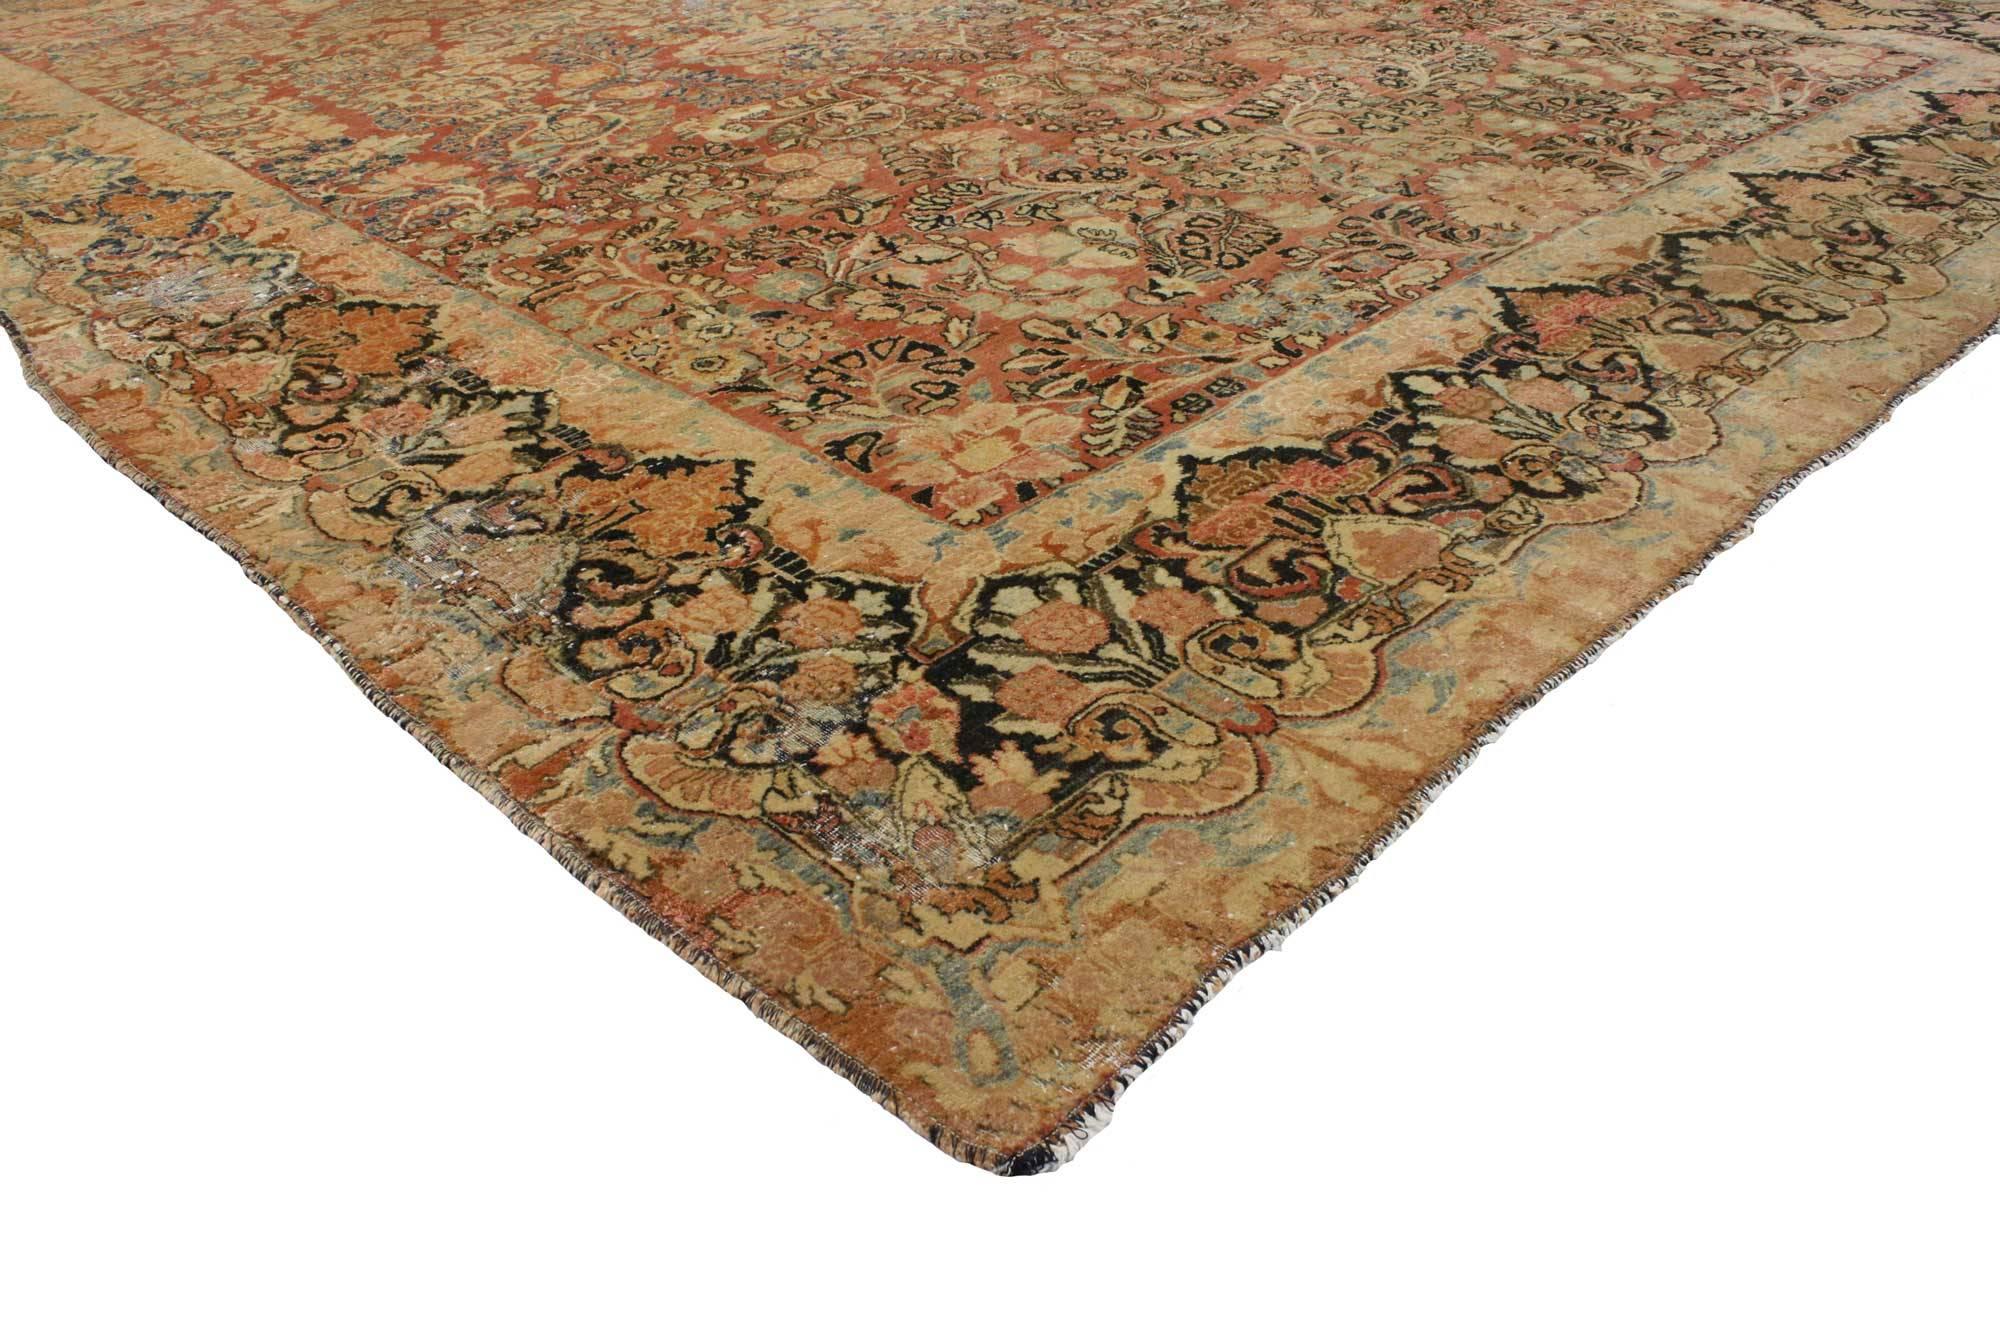 76699 Distressed Antique Persian Sarouk Rug with Rustic Arts and Crafts Style 09'00 x 11'04. The architectural elements of naturalistic forms and warm earthy colors combined with Arts & Crafts style, this hand knotted wool distressed antique Persian